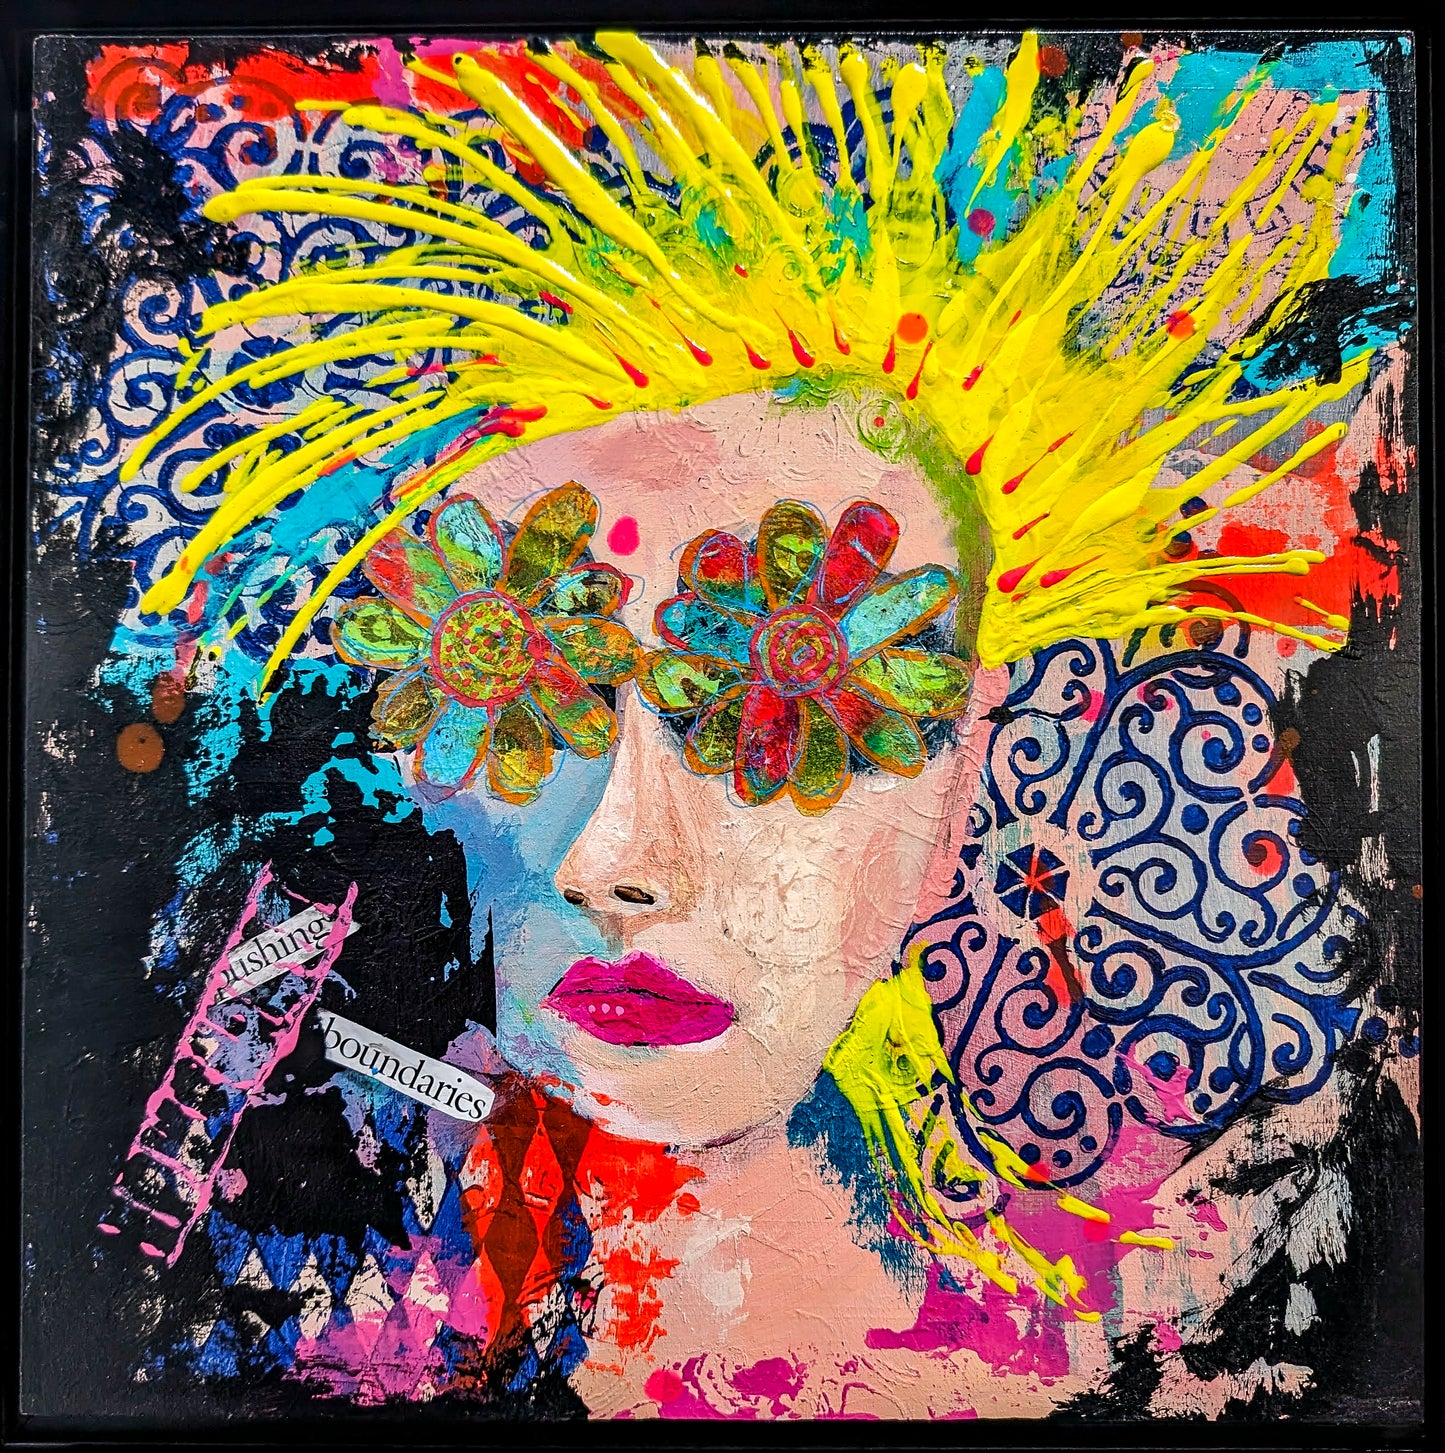 Mixed media piece of a whimsy girl with bright yellow hair, flower eyes against a colorful background of shapes and stencils